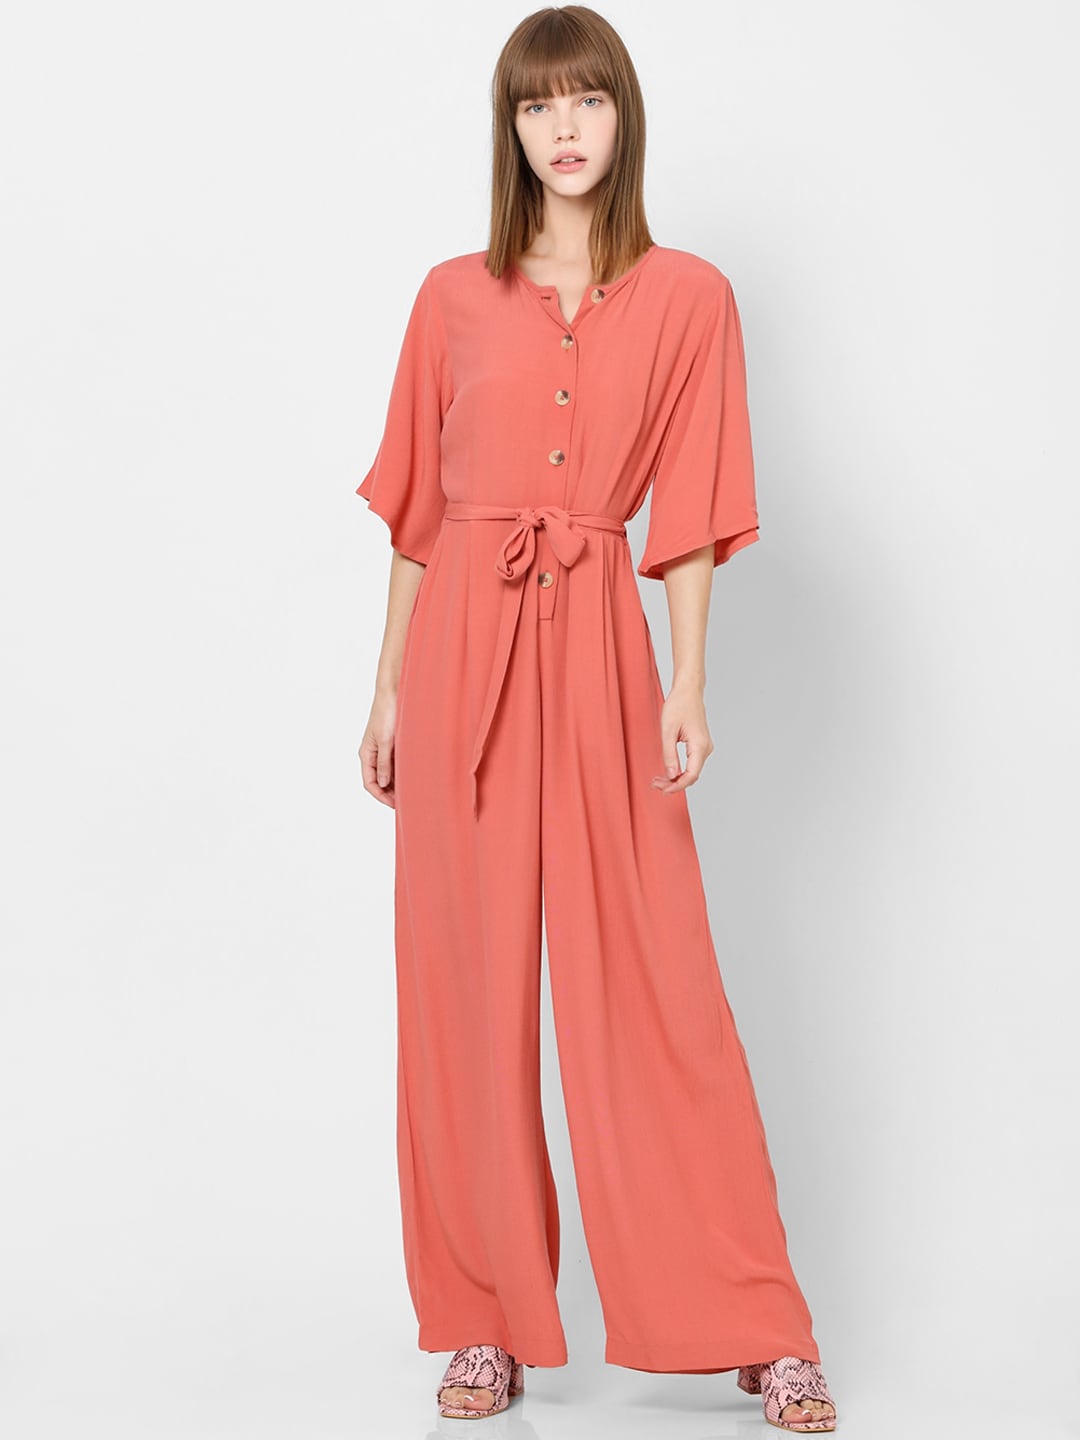 ONLY Women Peach-Coloured Solid Basic Jumpsuit Price in India